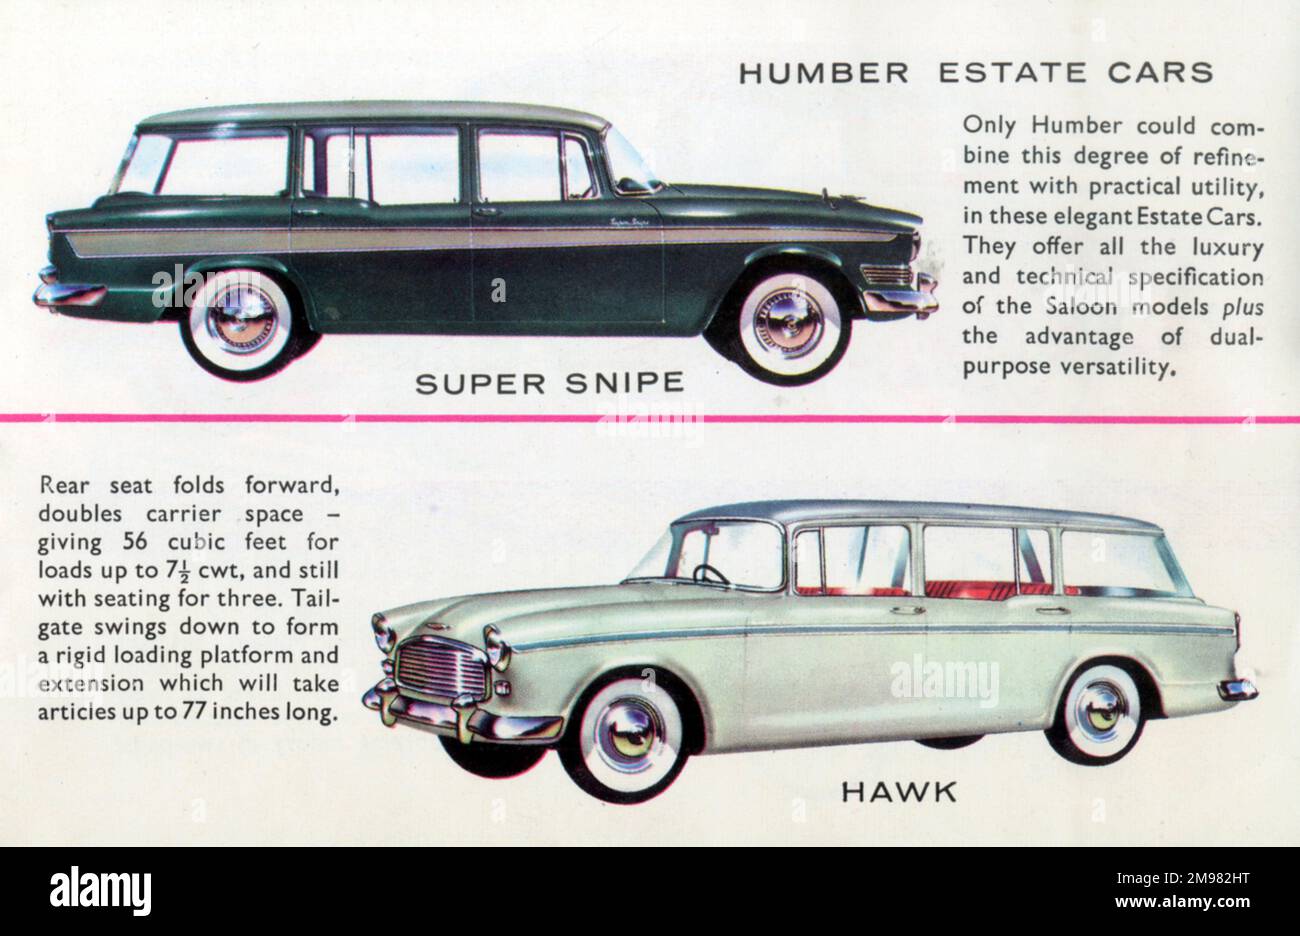 Two Humber Estate cars advertised in a Humber, Hillman and Sunbeam Rootes Motors Limited brochure - The 'Hawk' and the 'Super Snipe'. Stock Photo